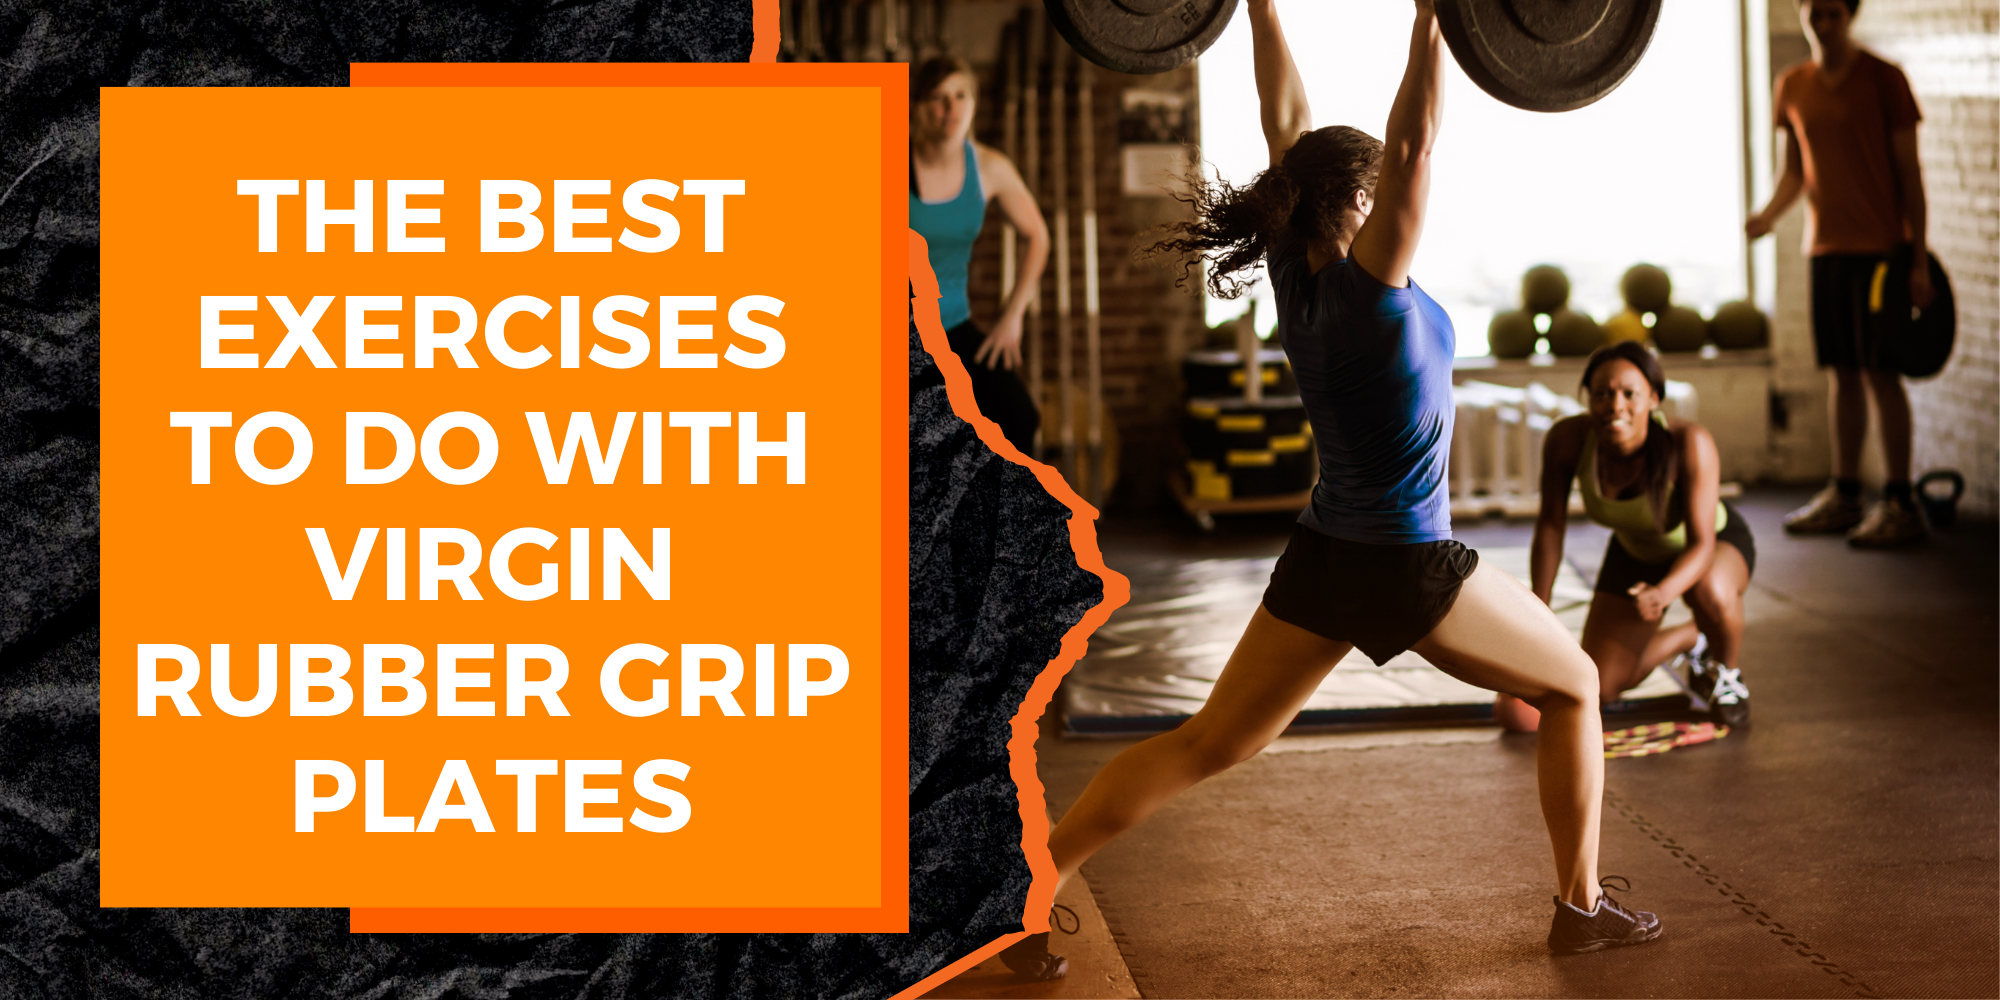 The Best Exercises to Do with Virgin Rubber Grip Plates